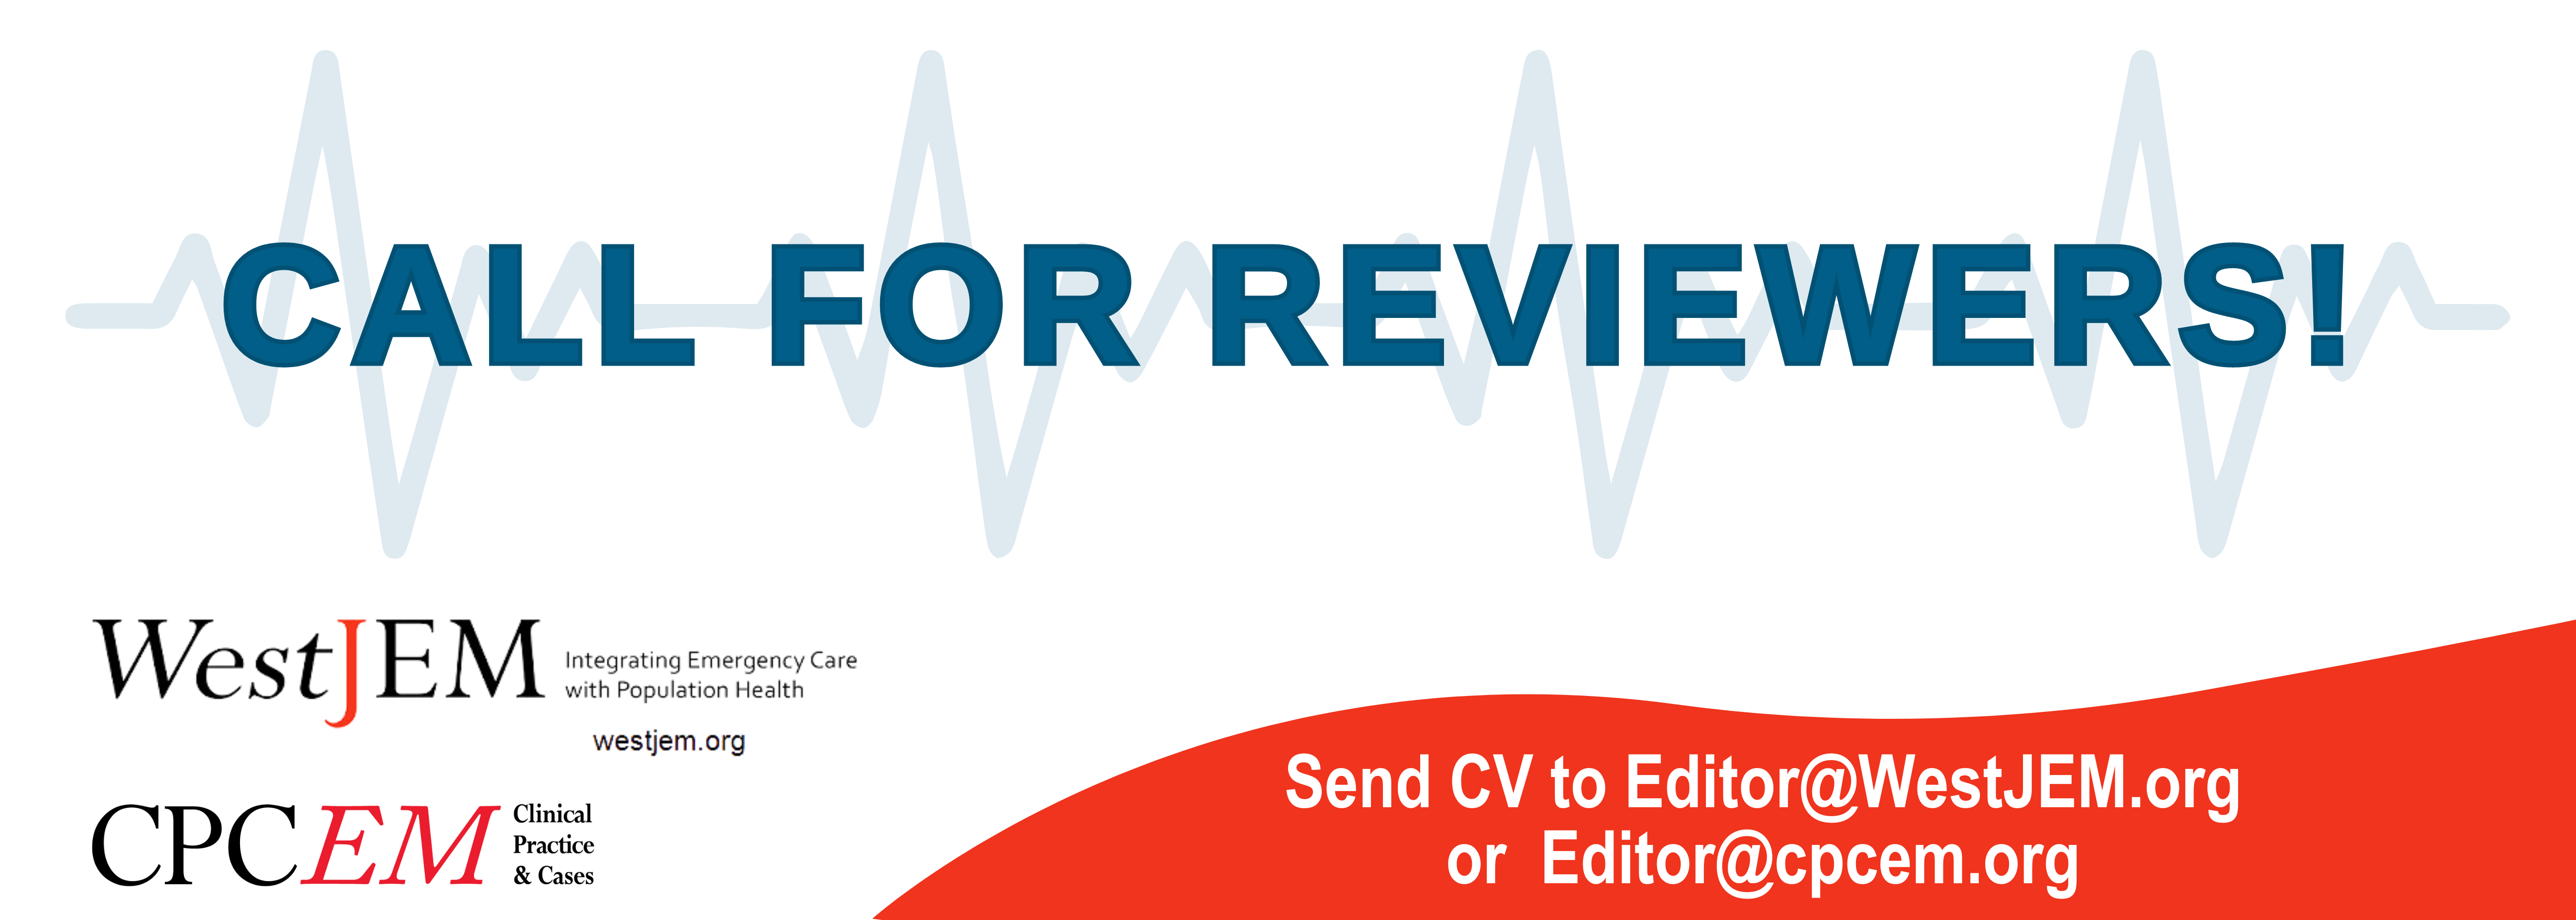 Call-for-Reviewers-New-3